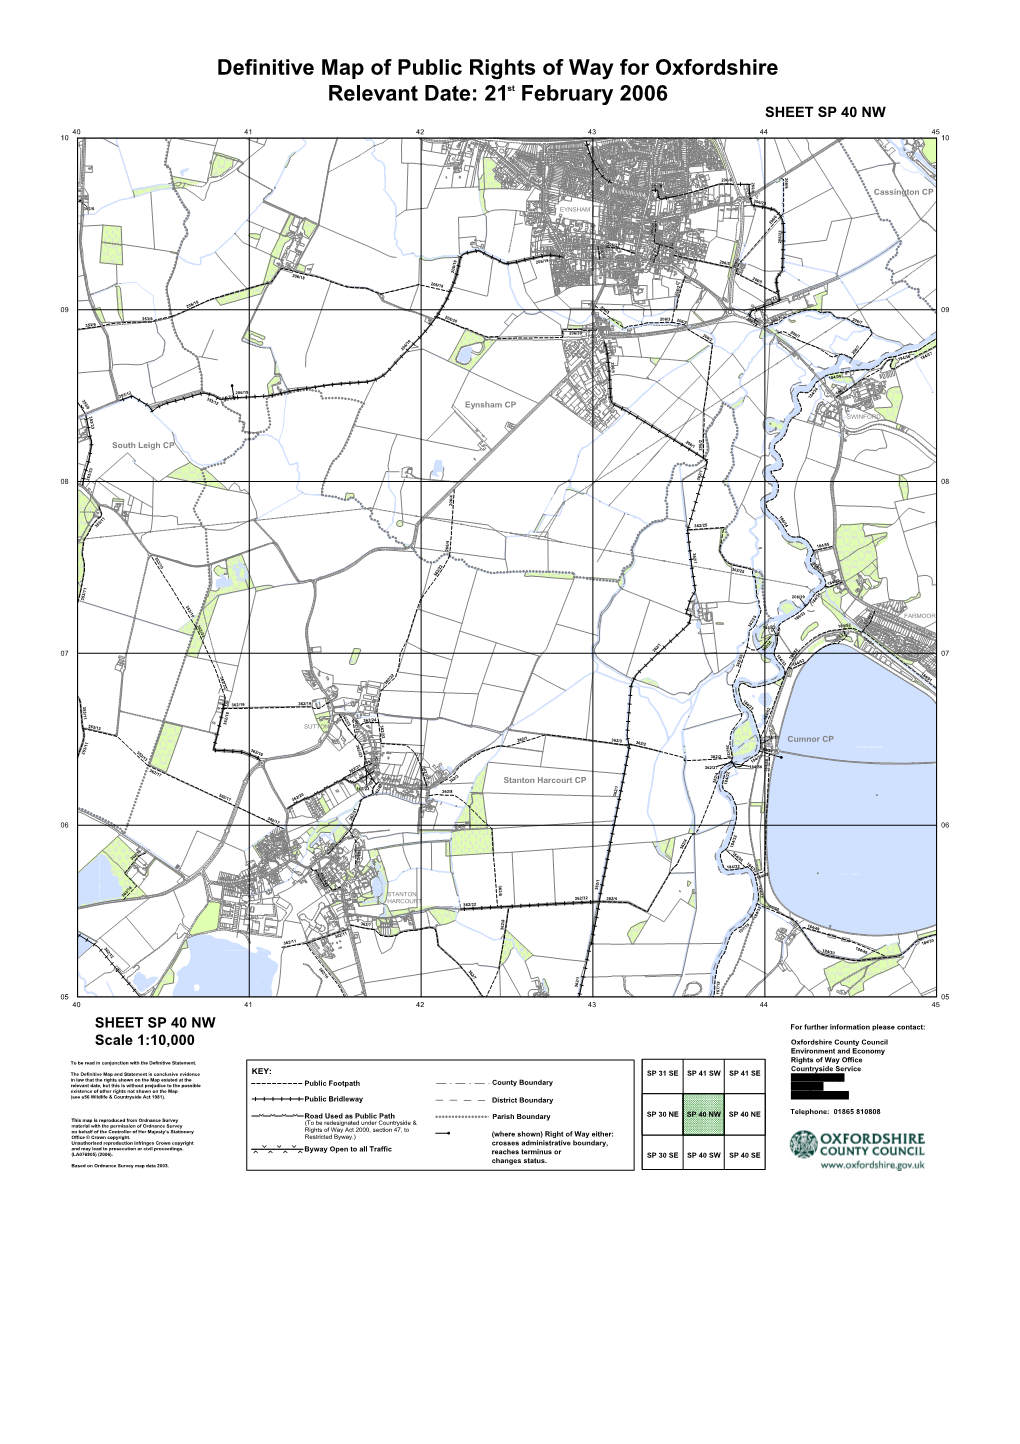 Definitive Map of Public Rights of Way for Oxfordshire Relevant Date: 21St February 2006 Colour SHEET SP 40 NW